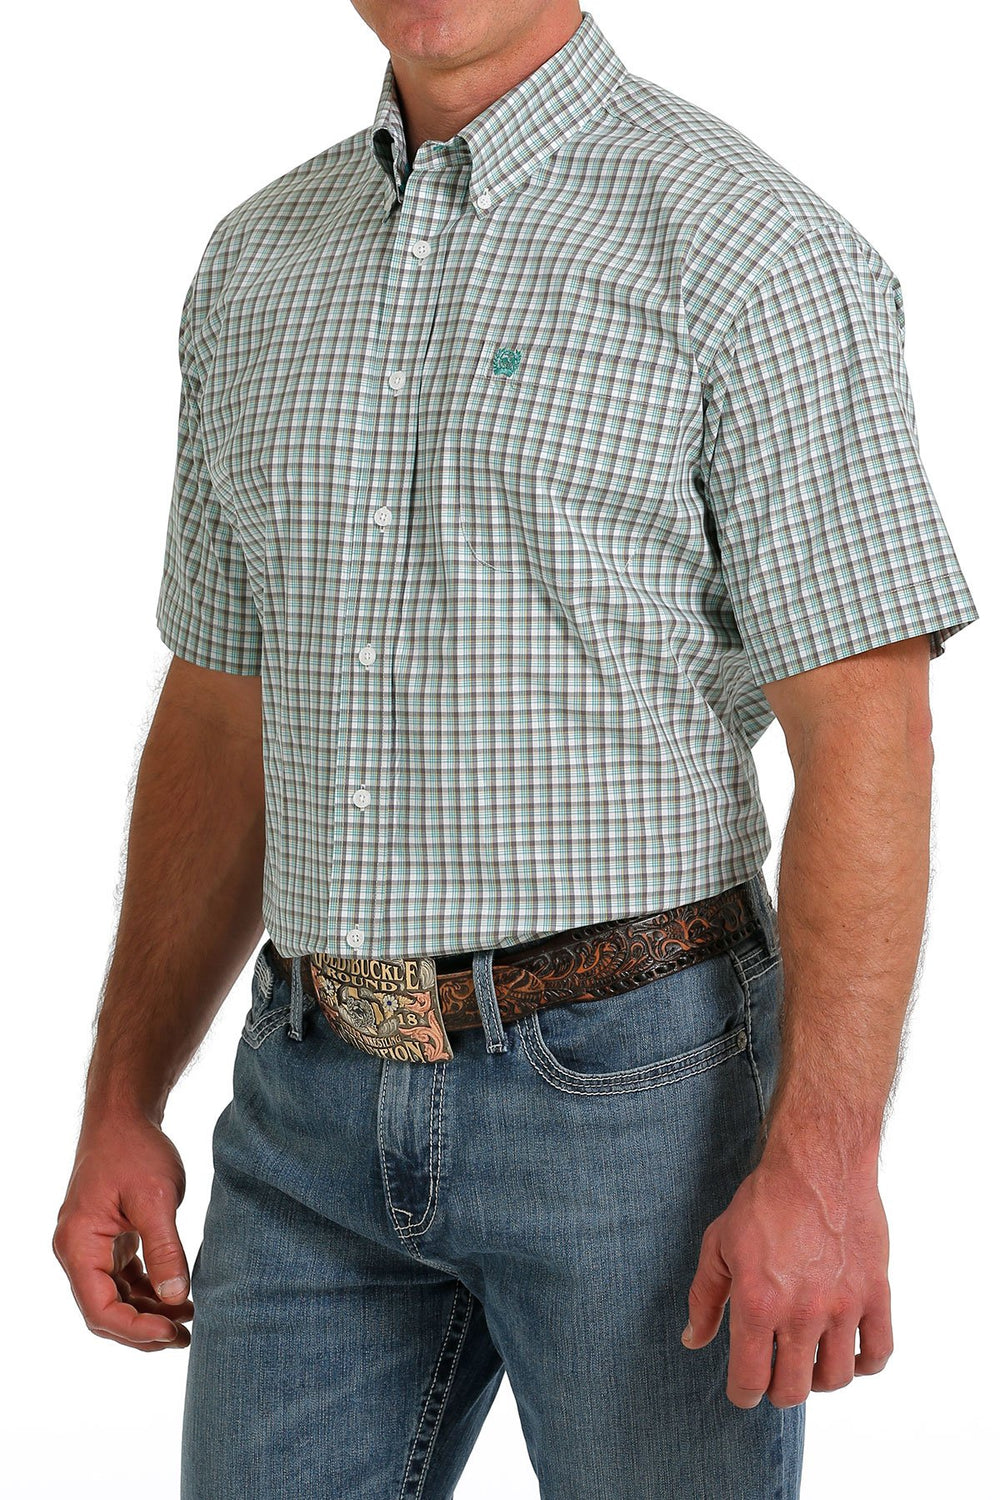 Cinch - Mens White/Teal S/S Arena Shirt